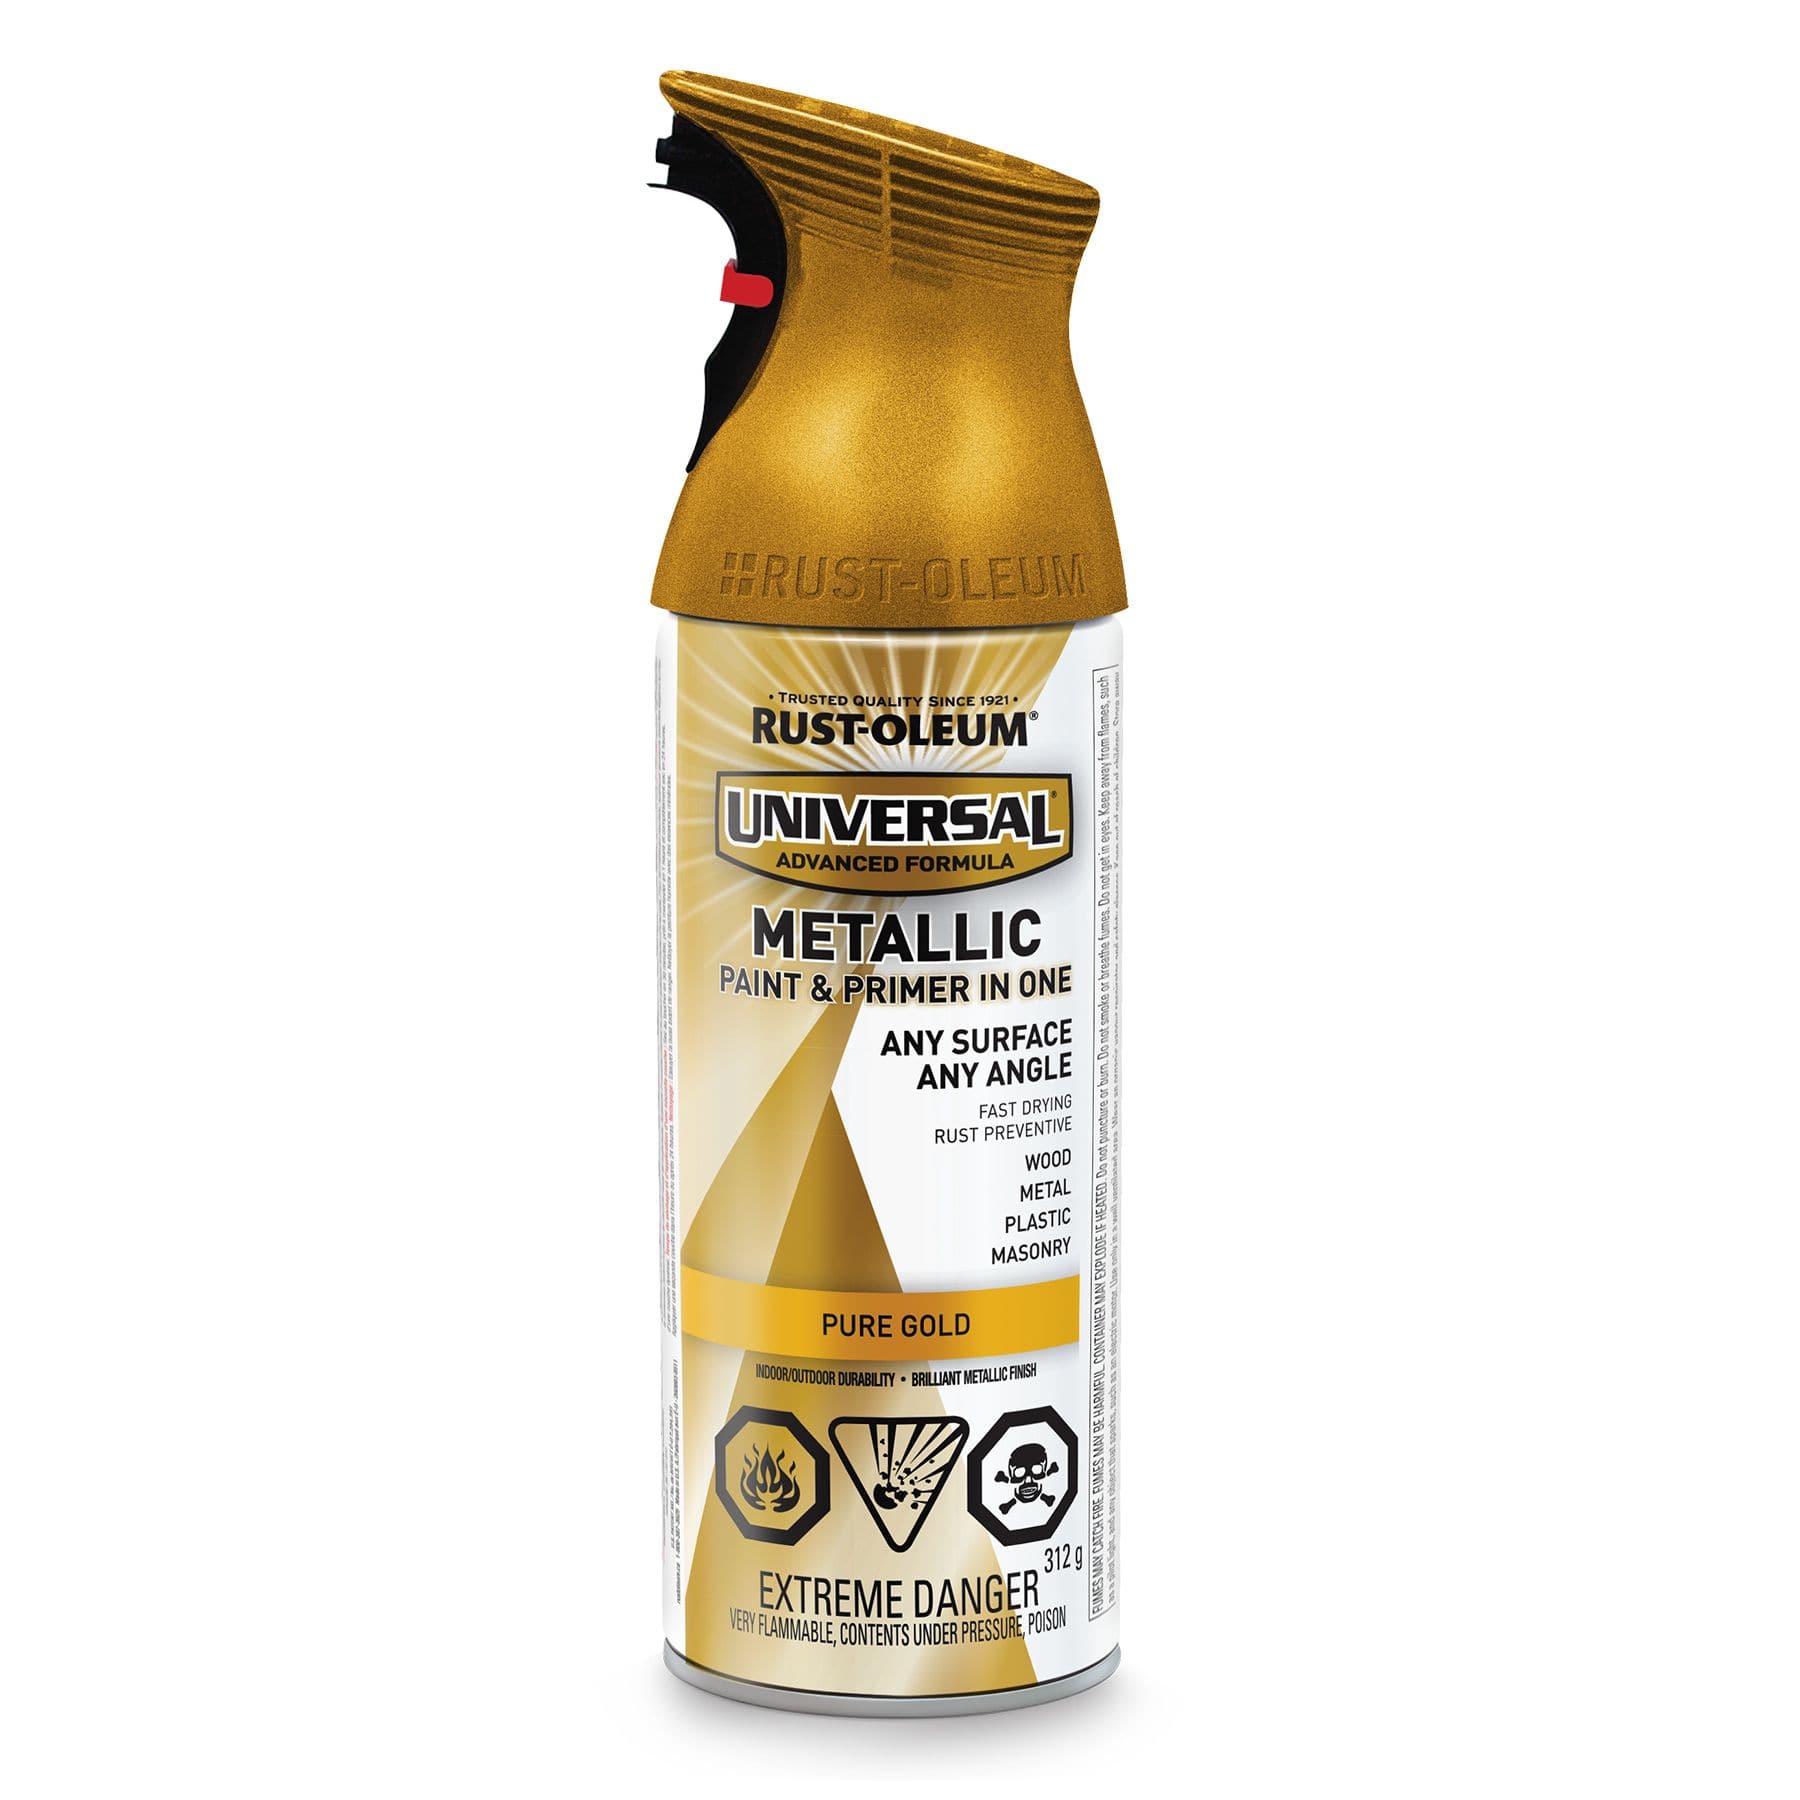 https://media-www.canadiantire.ca/product/fixing/paint/paints/0482321/universal-all-surface-paint-gold-metallic-340g-32bcd608-f701-4a3f-a6f1-c1d9f0a2008d-jpgrendition.jpg